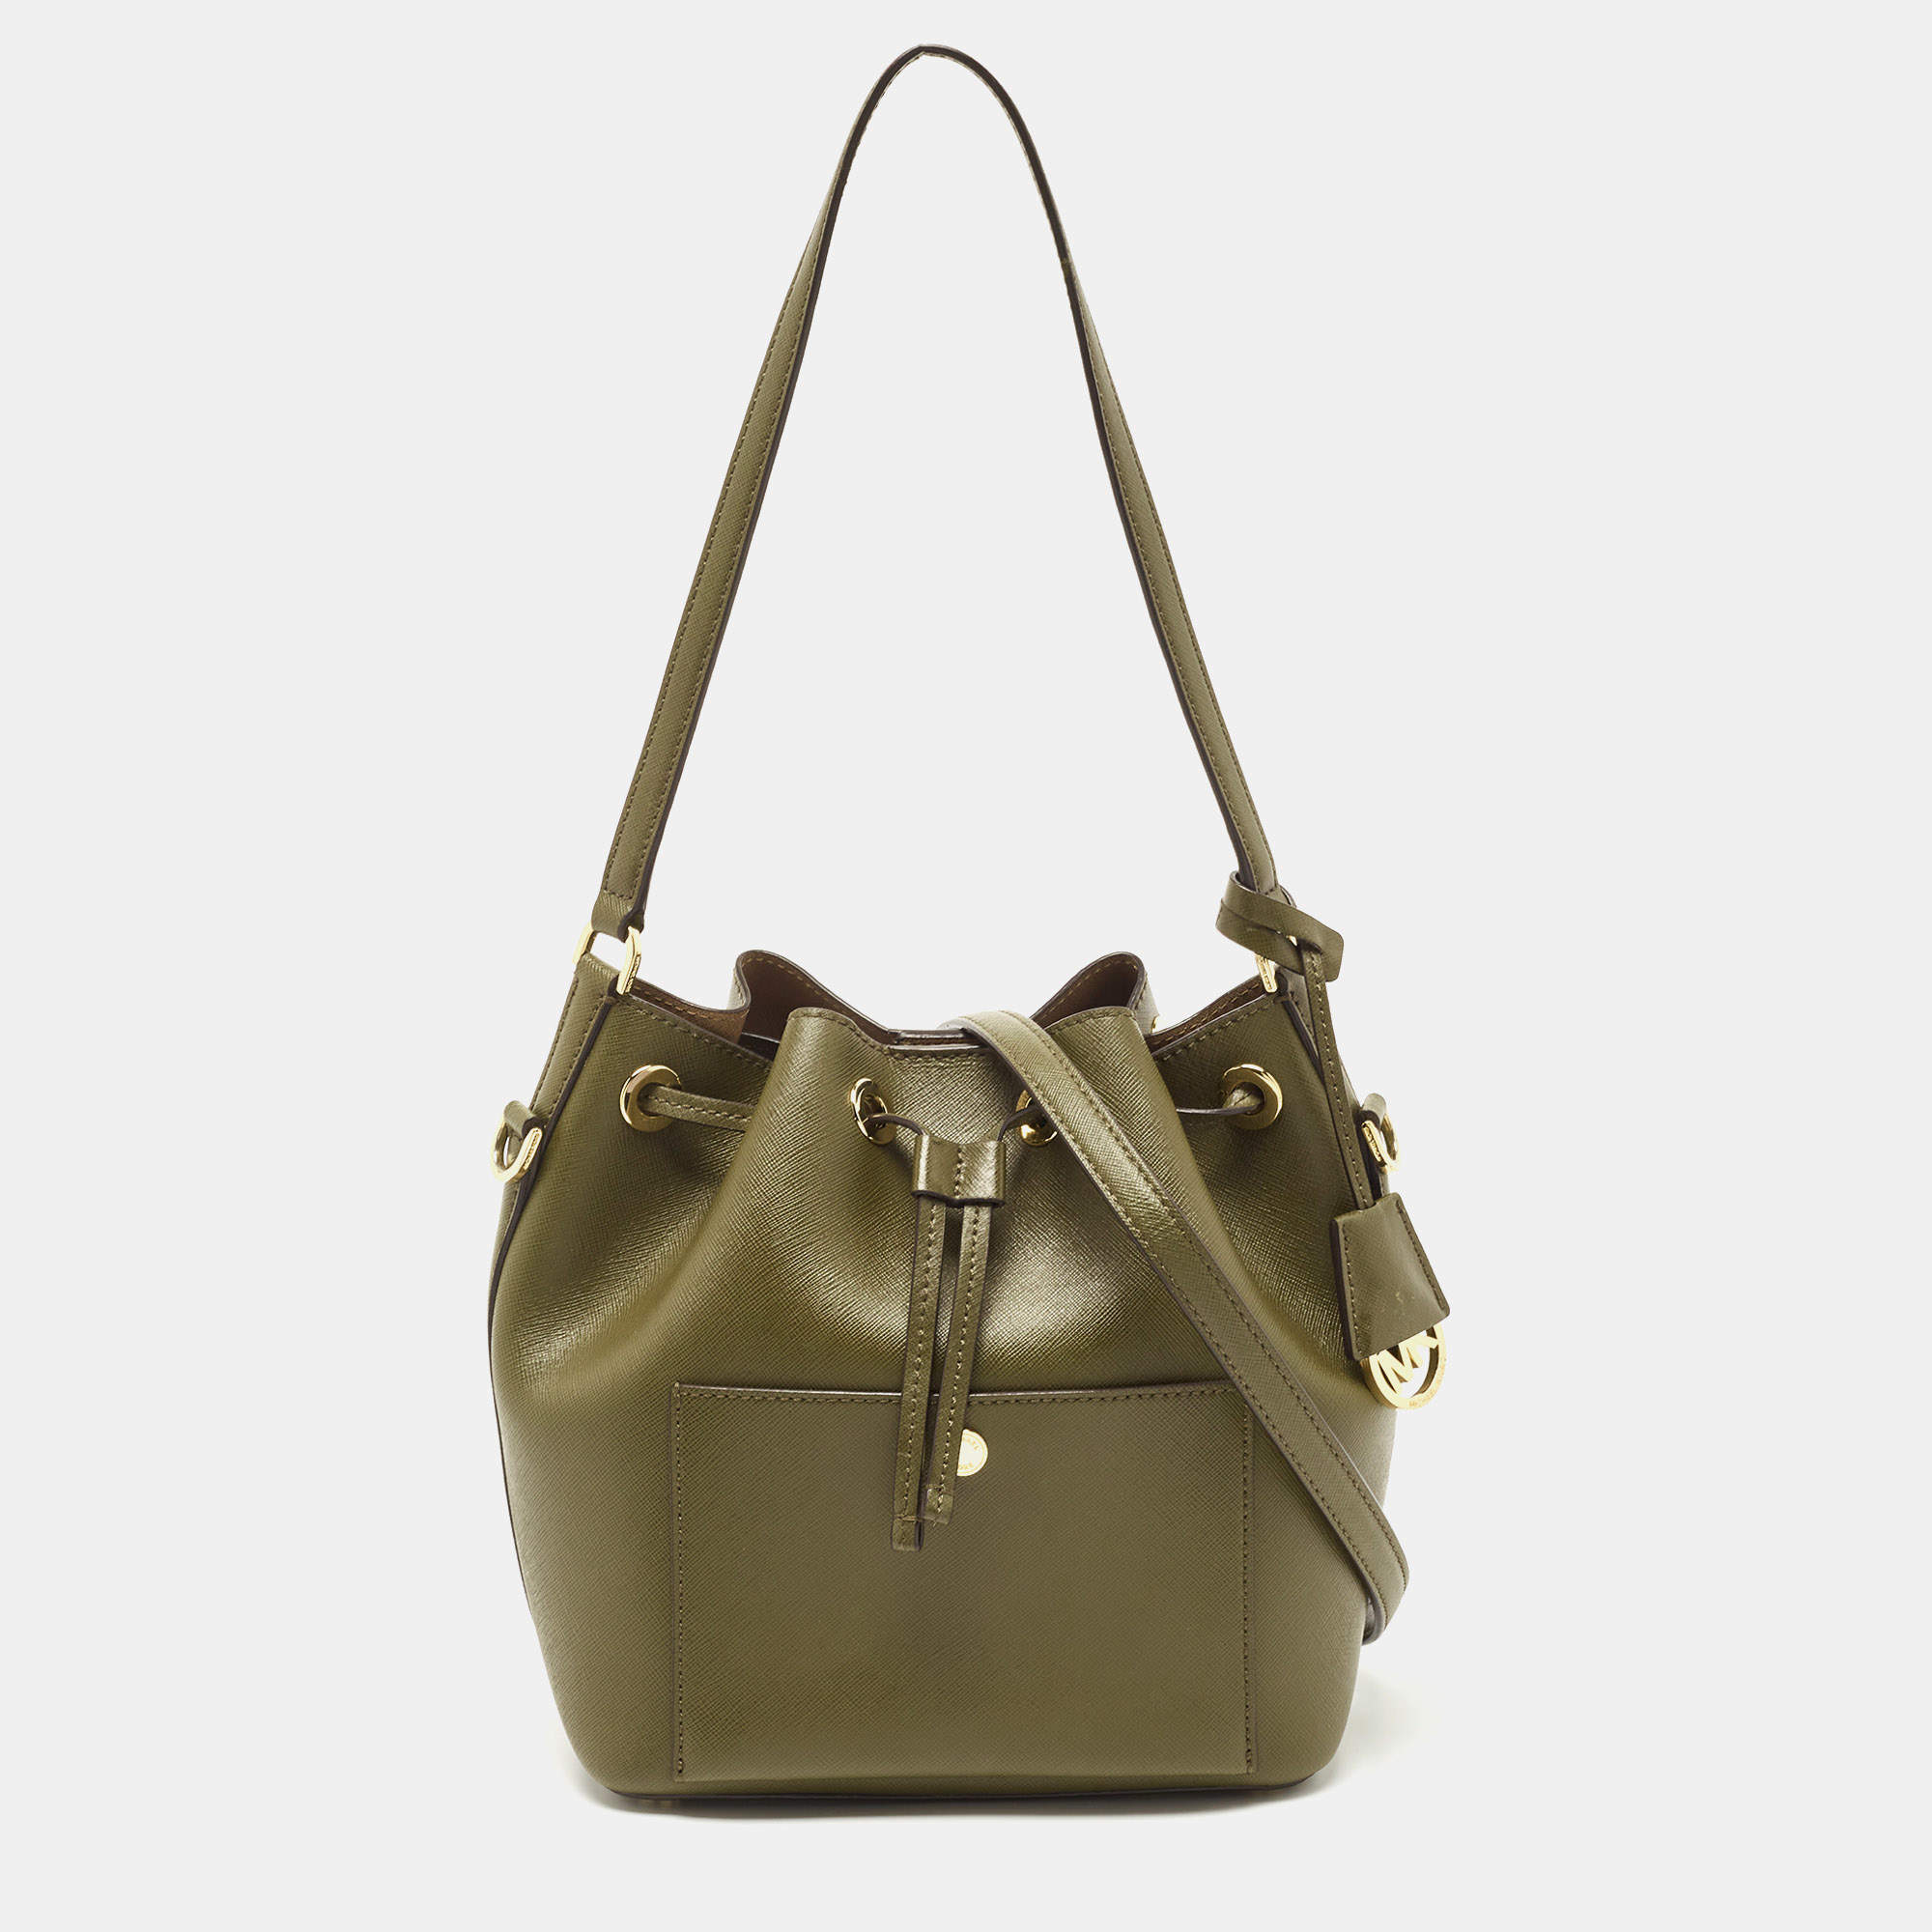 MICHAEL KORS: Michael Jet Set bag in grained leather - Green | Michael Kors  crossbody bags 32S4GTVC3L online at GIGLIO.COM